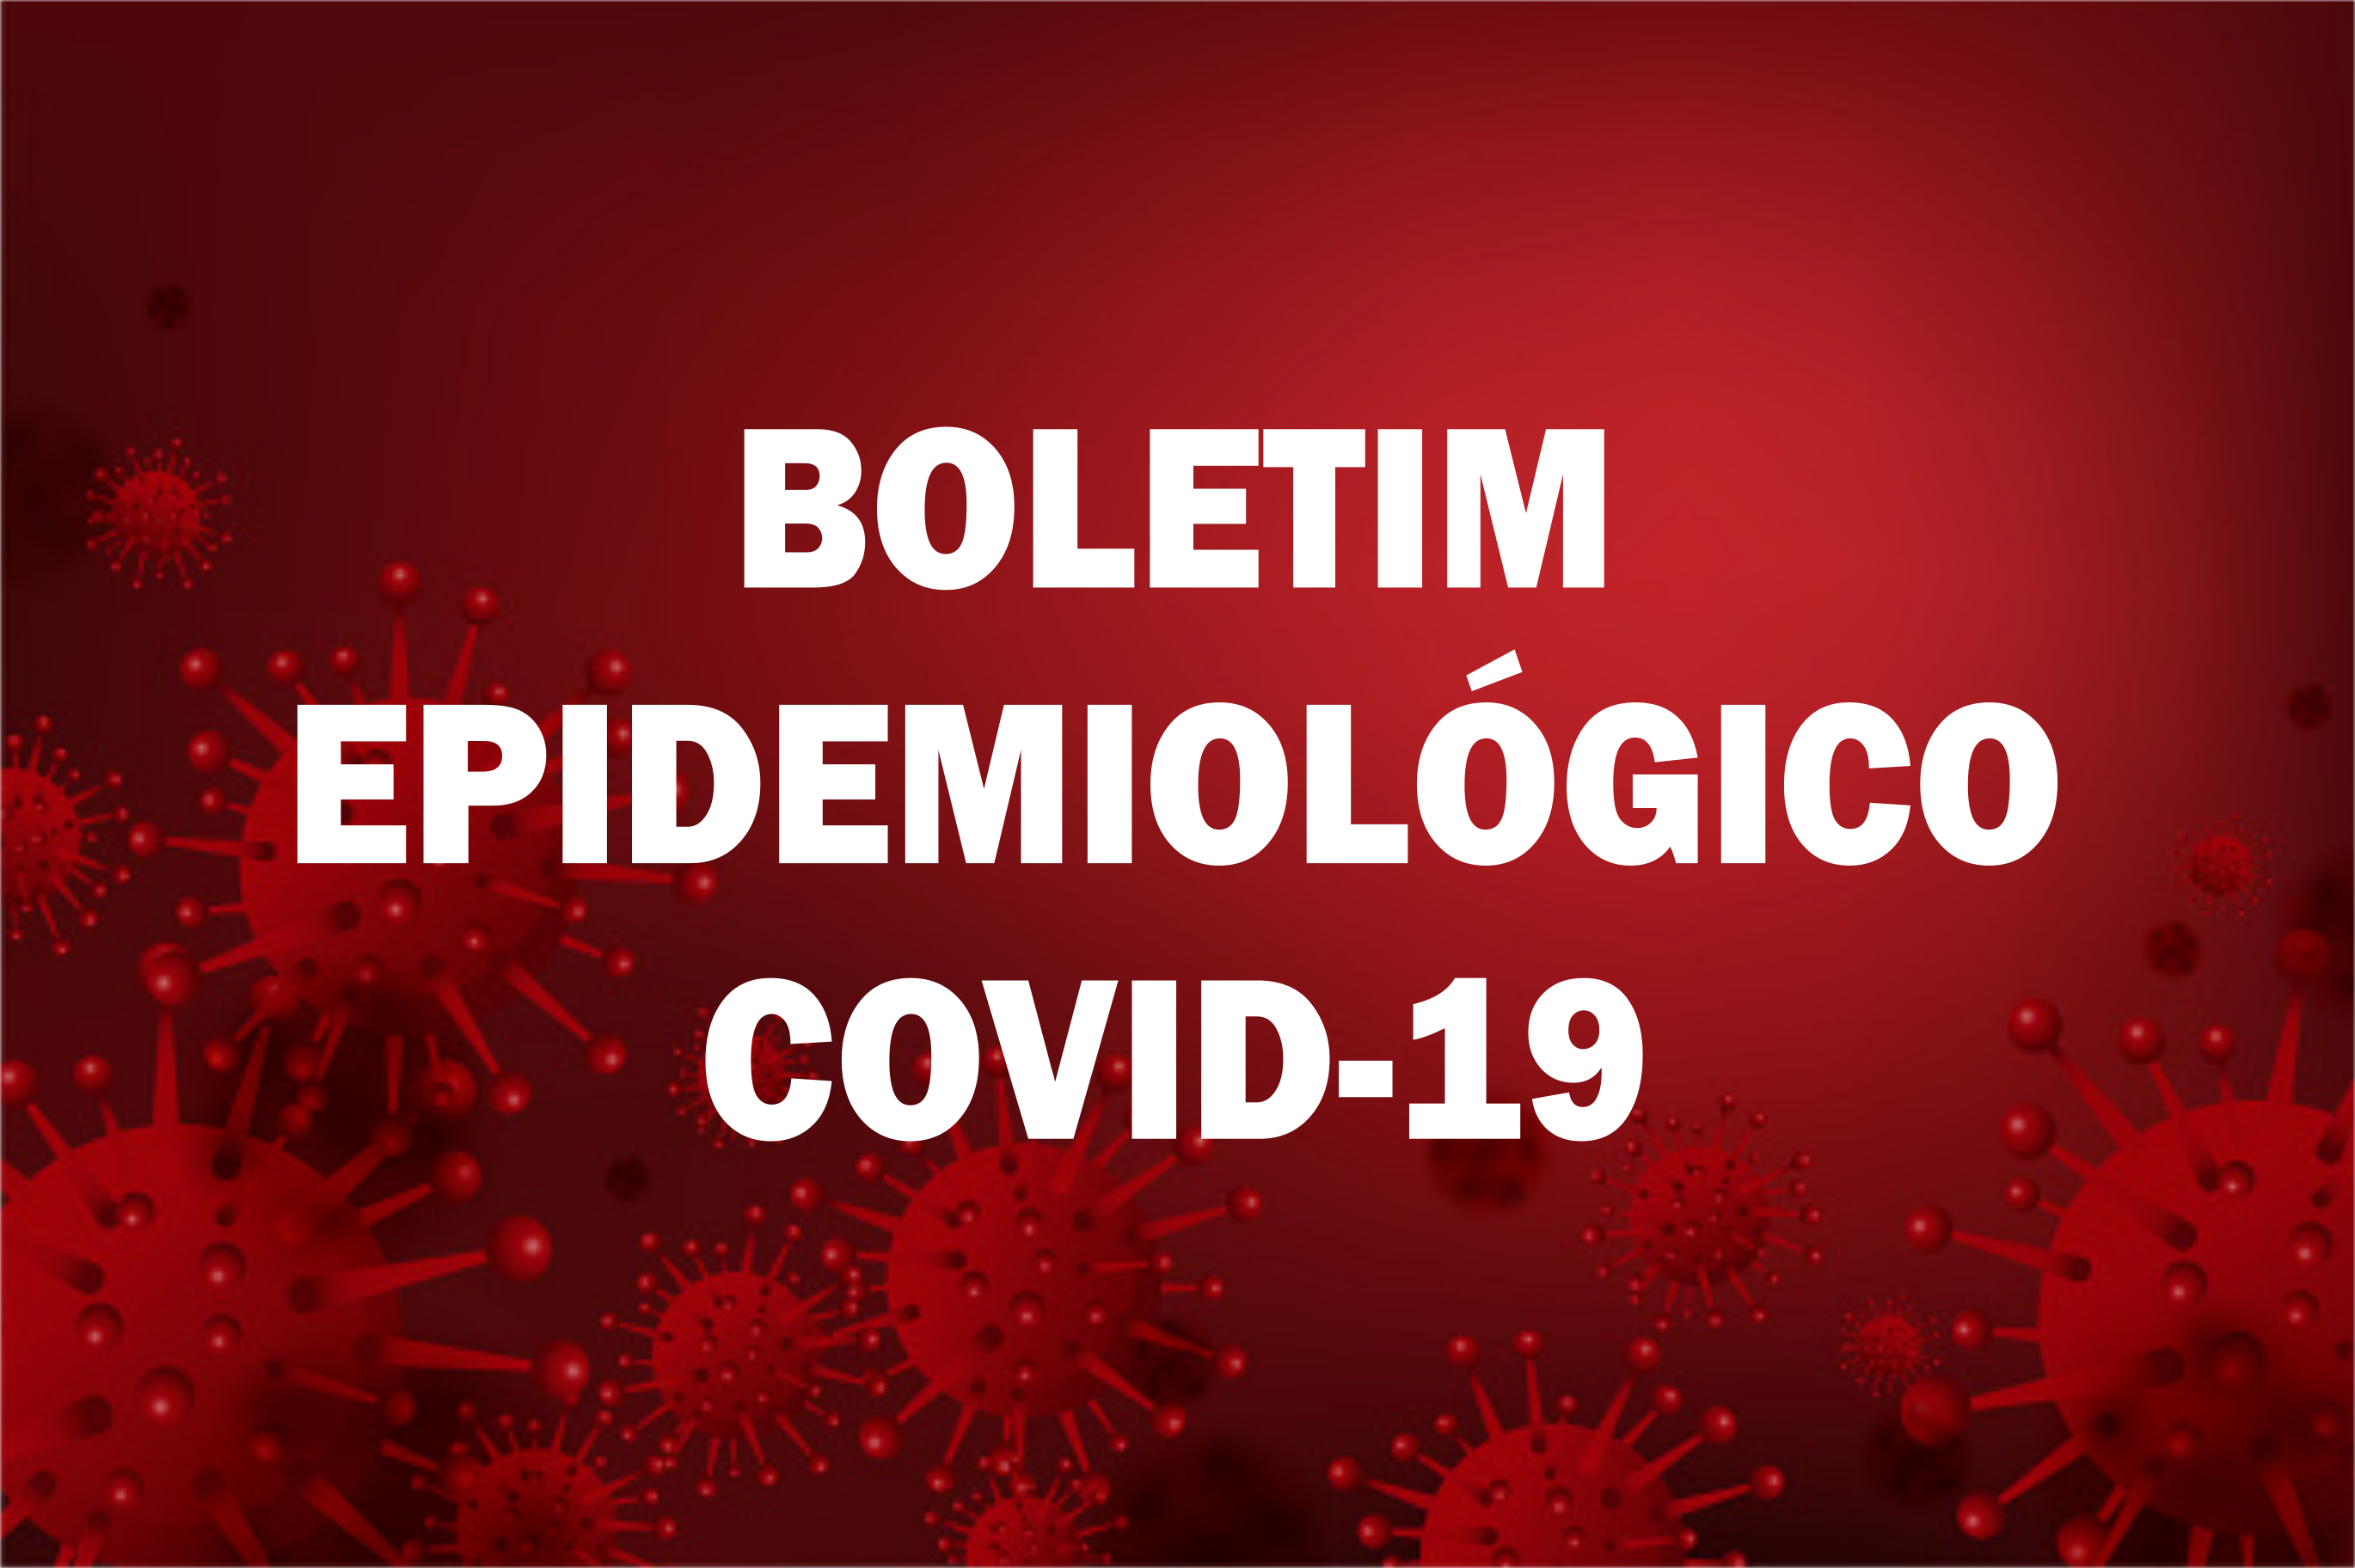 You are currently viewing BOLETIM EPIDEMIOLÓGICO Nº 147 (COVID-19)